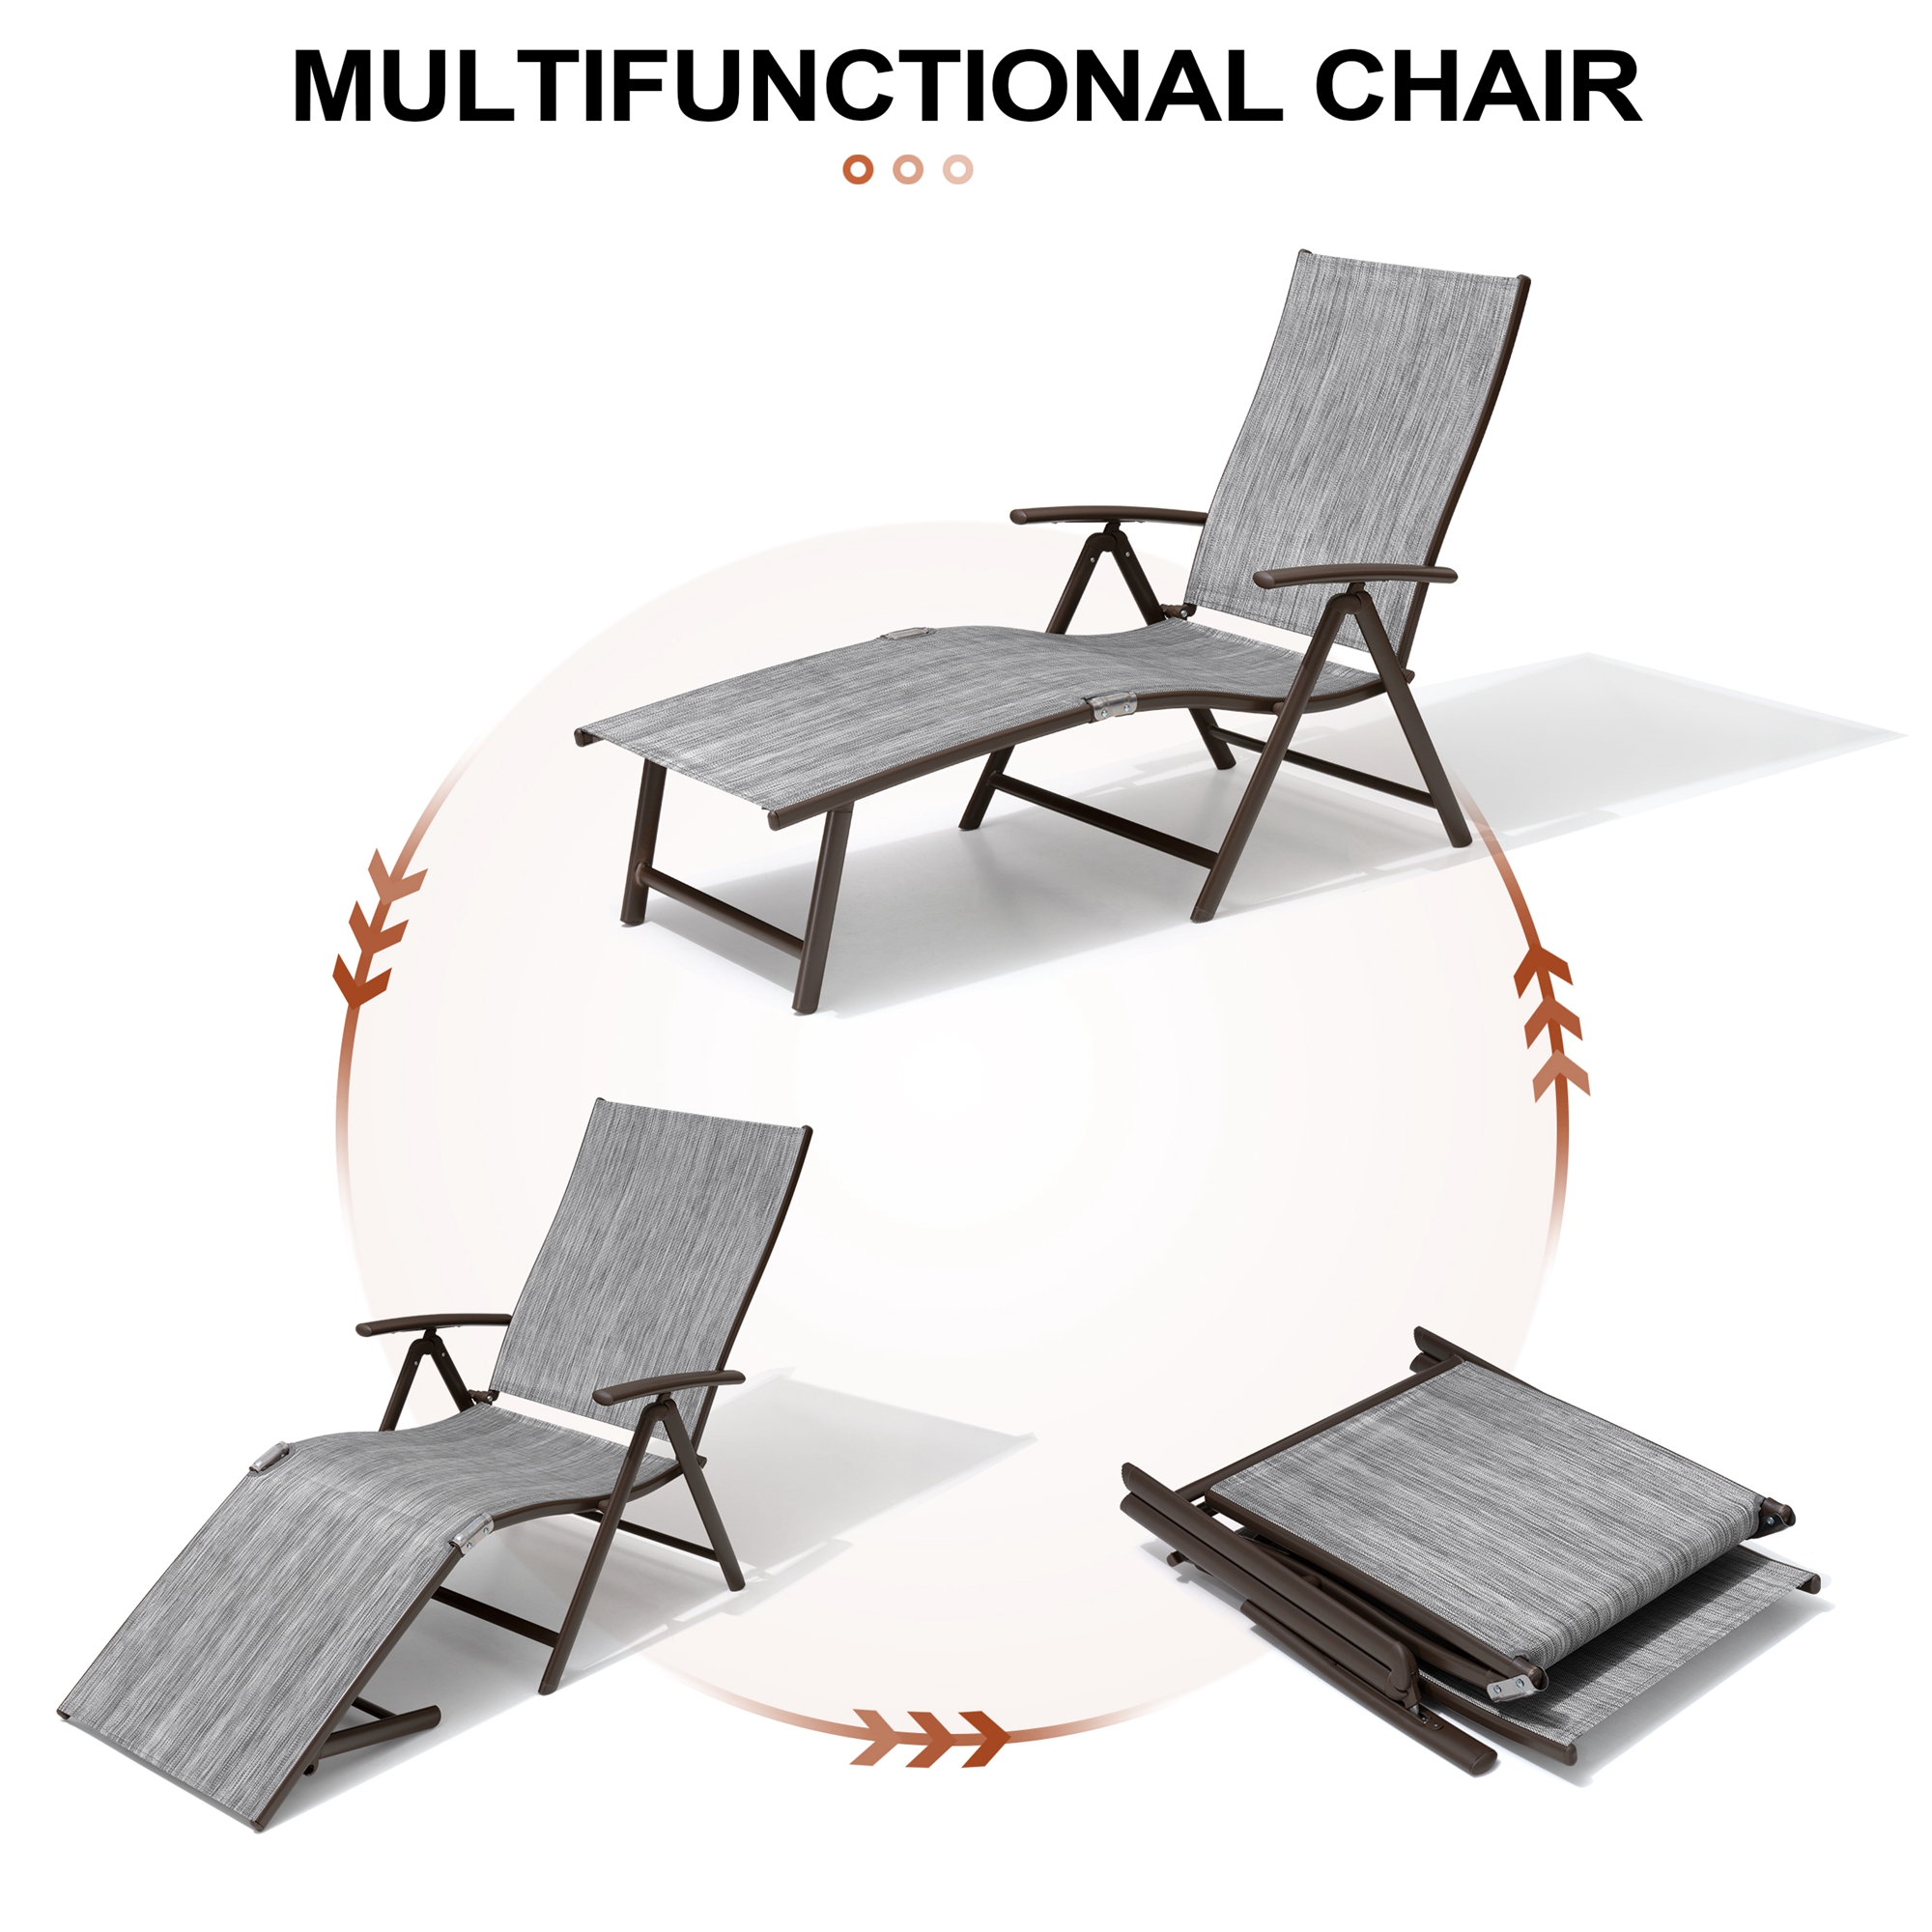 Pellebant Set of 2 Outdoor Chaise Lounge Aluminum Patio Folding Chairs,Gray - image 4 of 7